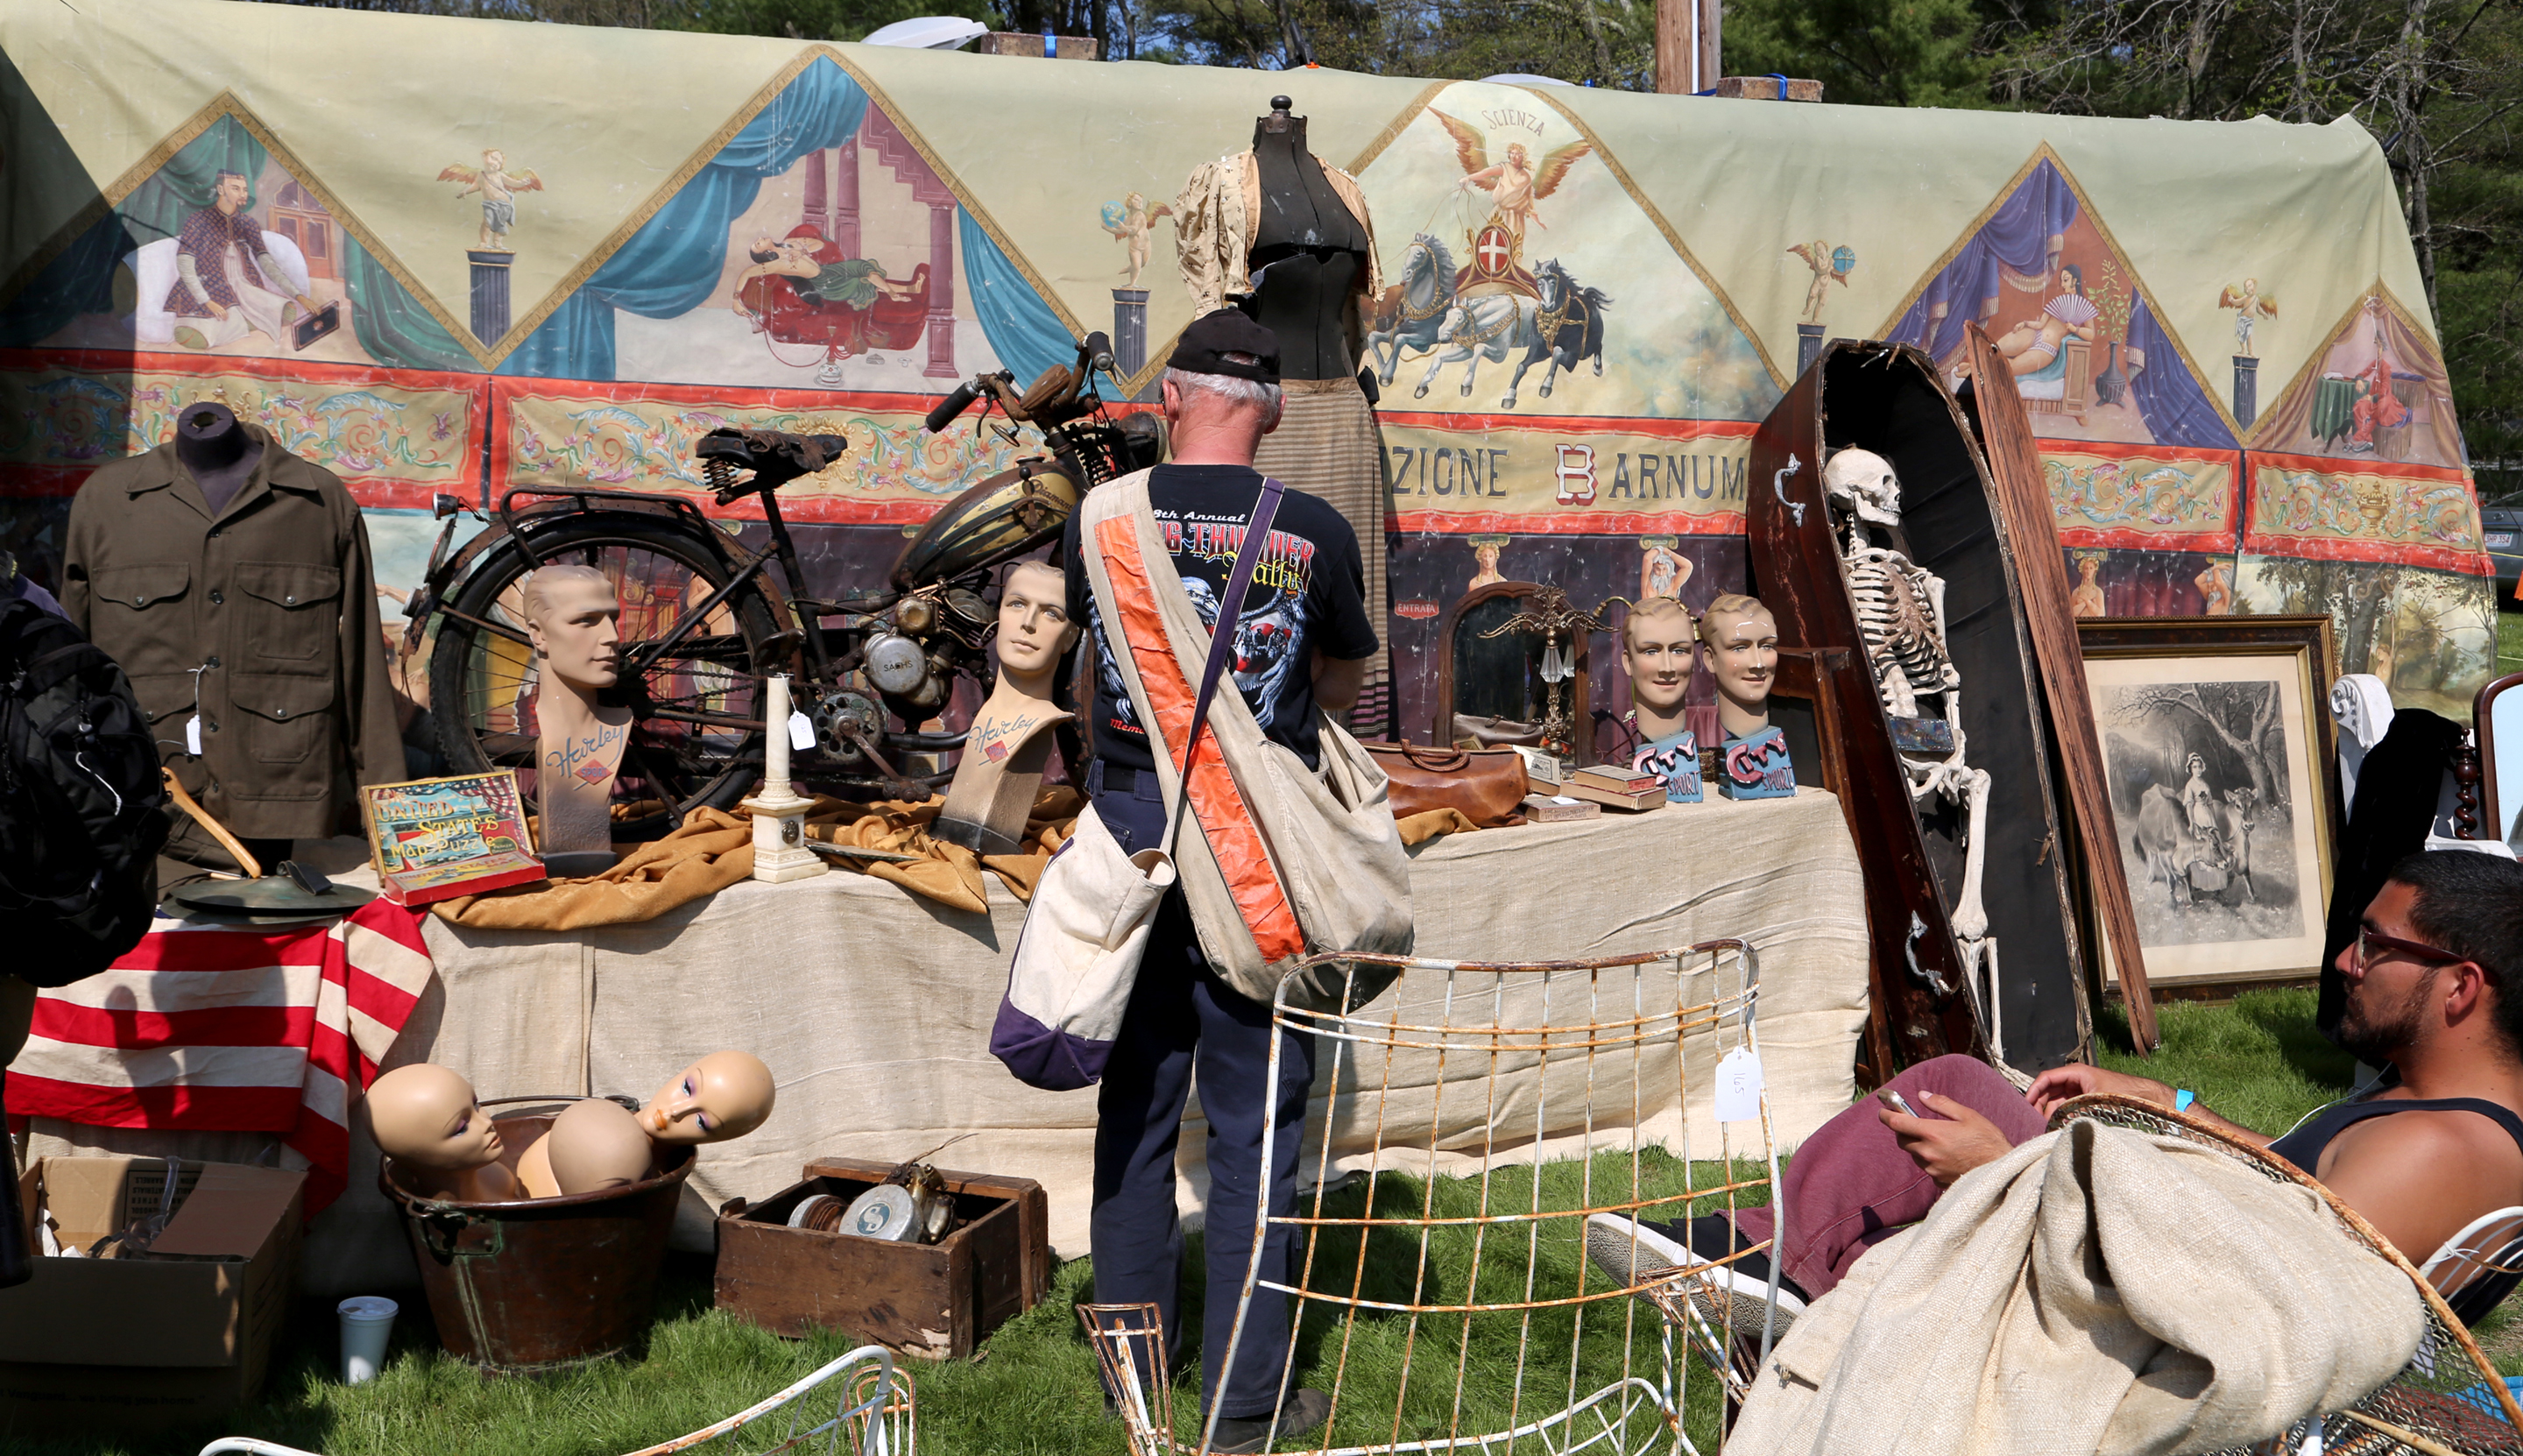 A booth of curiosities featuring a Diamant motorcycle, mannequin heads<br>and an Italian backdrop with religious scenes were brought by Kevin Harper, Round Top, Texas. —May’s